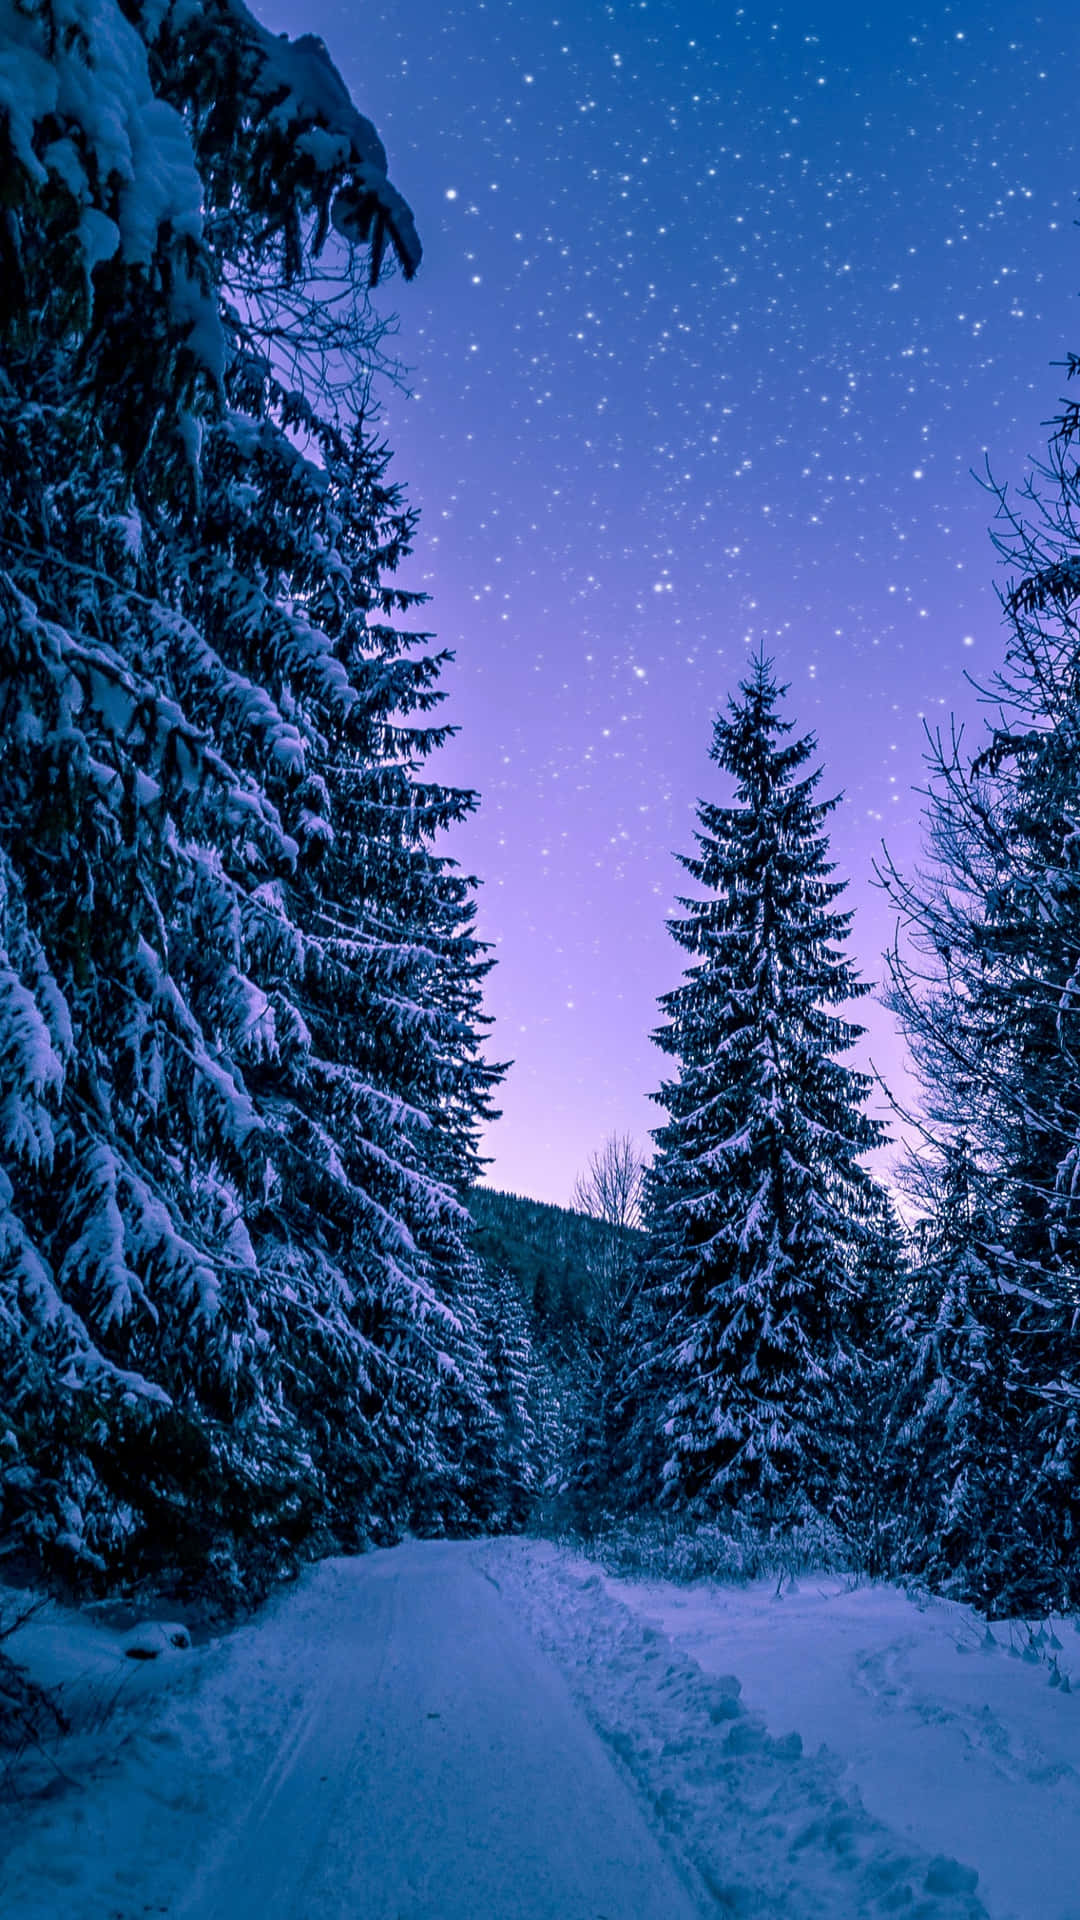 A Winter Snowfall Paints A Peaceful Winter Scene Background